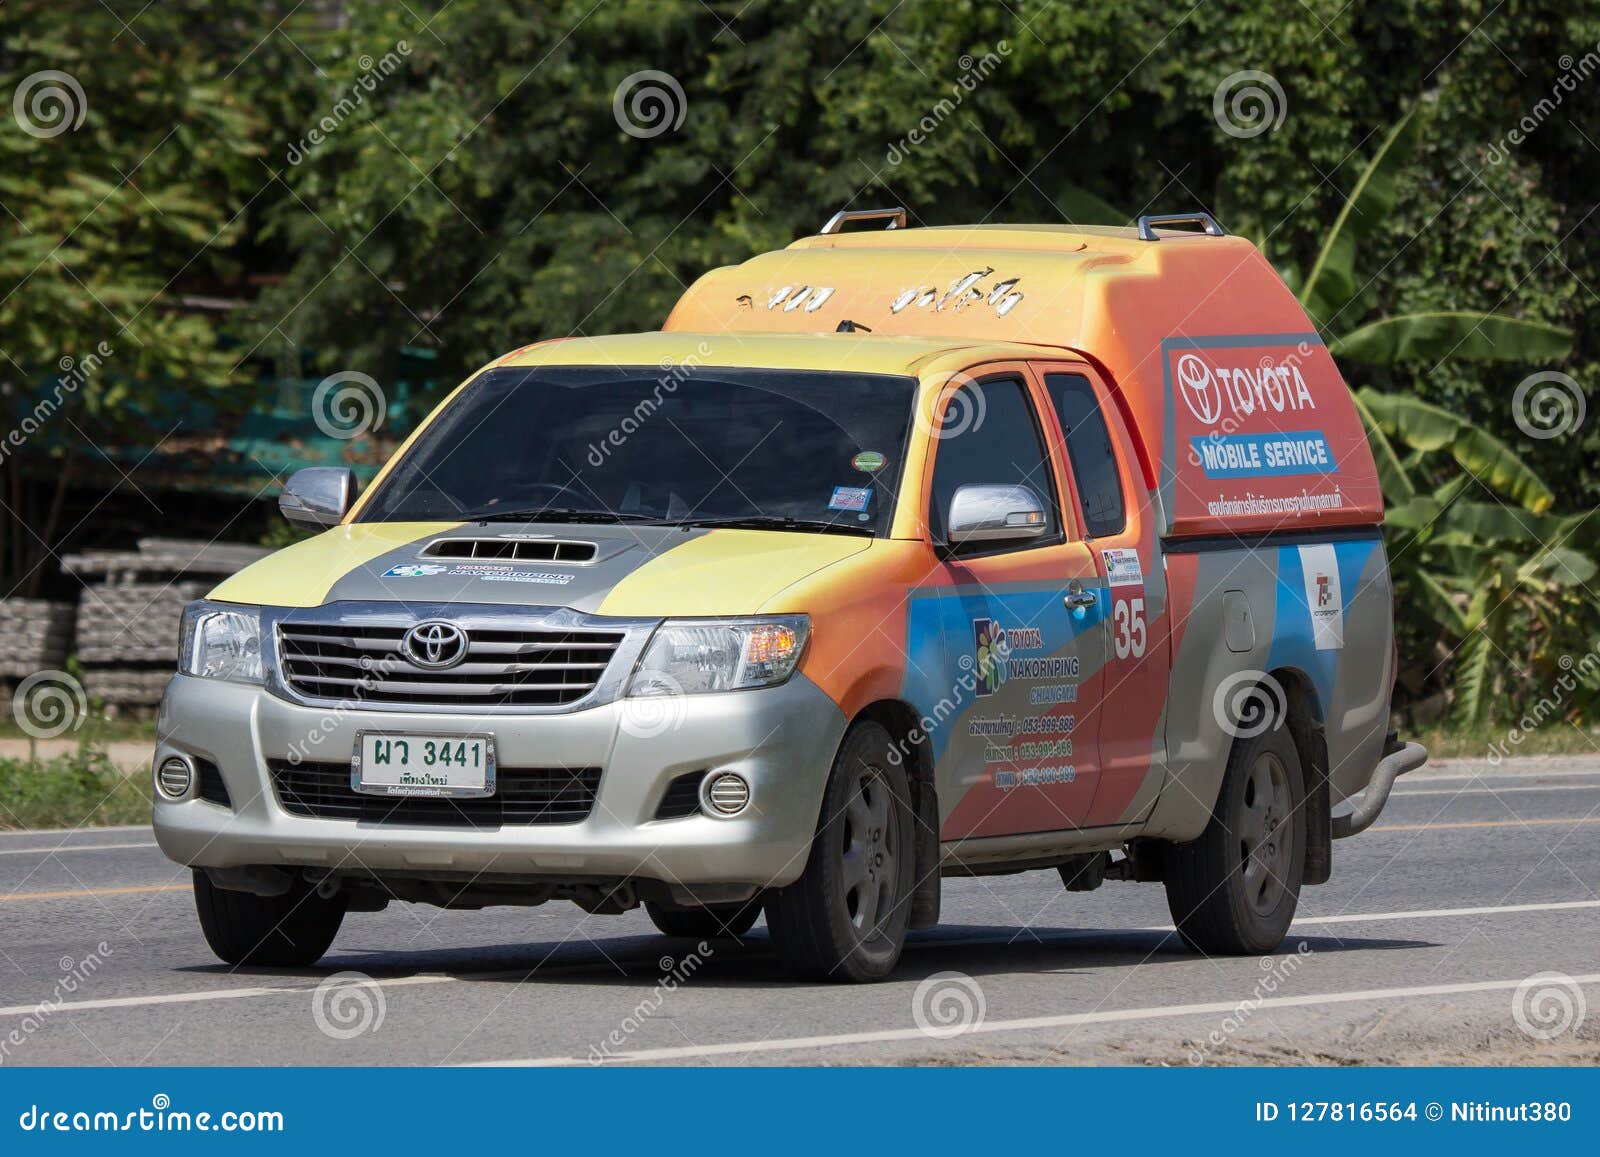  Mobile  Service  For Toyota Car  Editorial Stock Image 